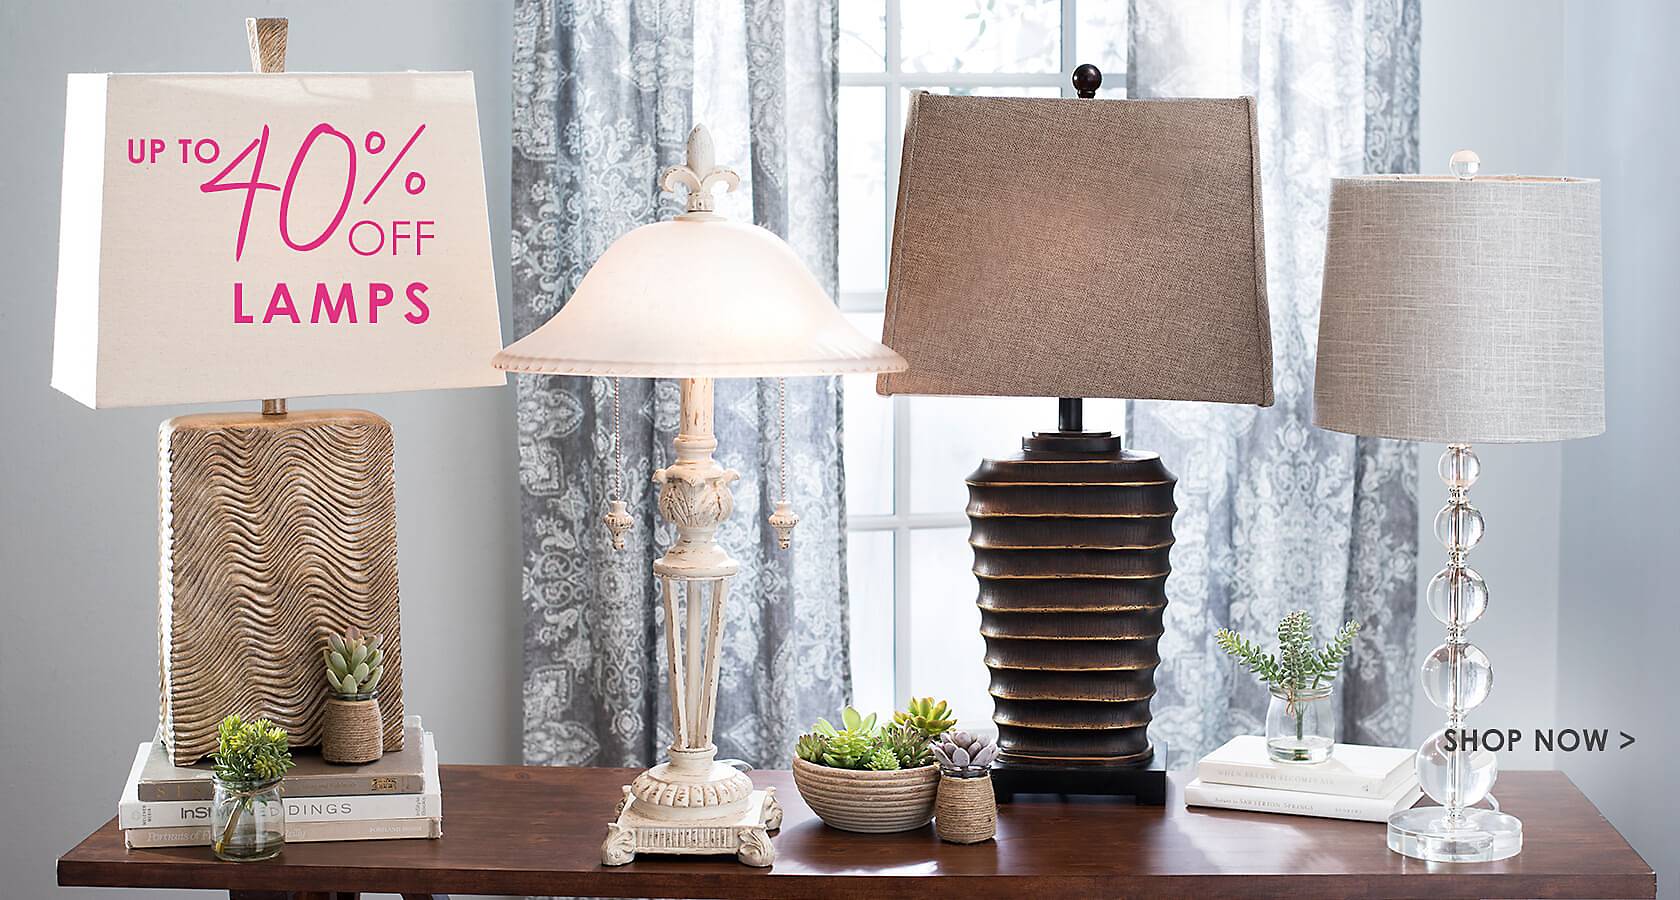 Up to 40% off lamps - Shop Now